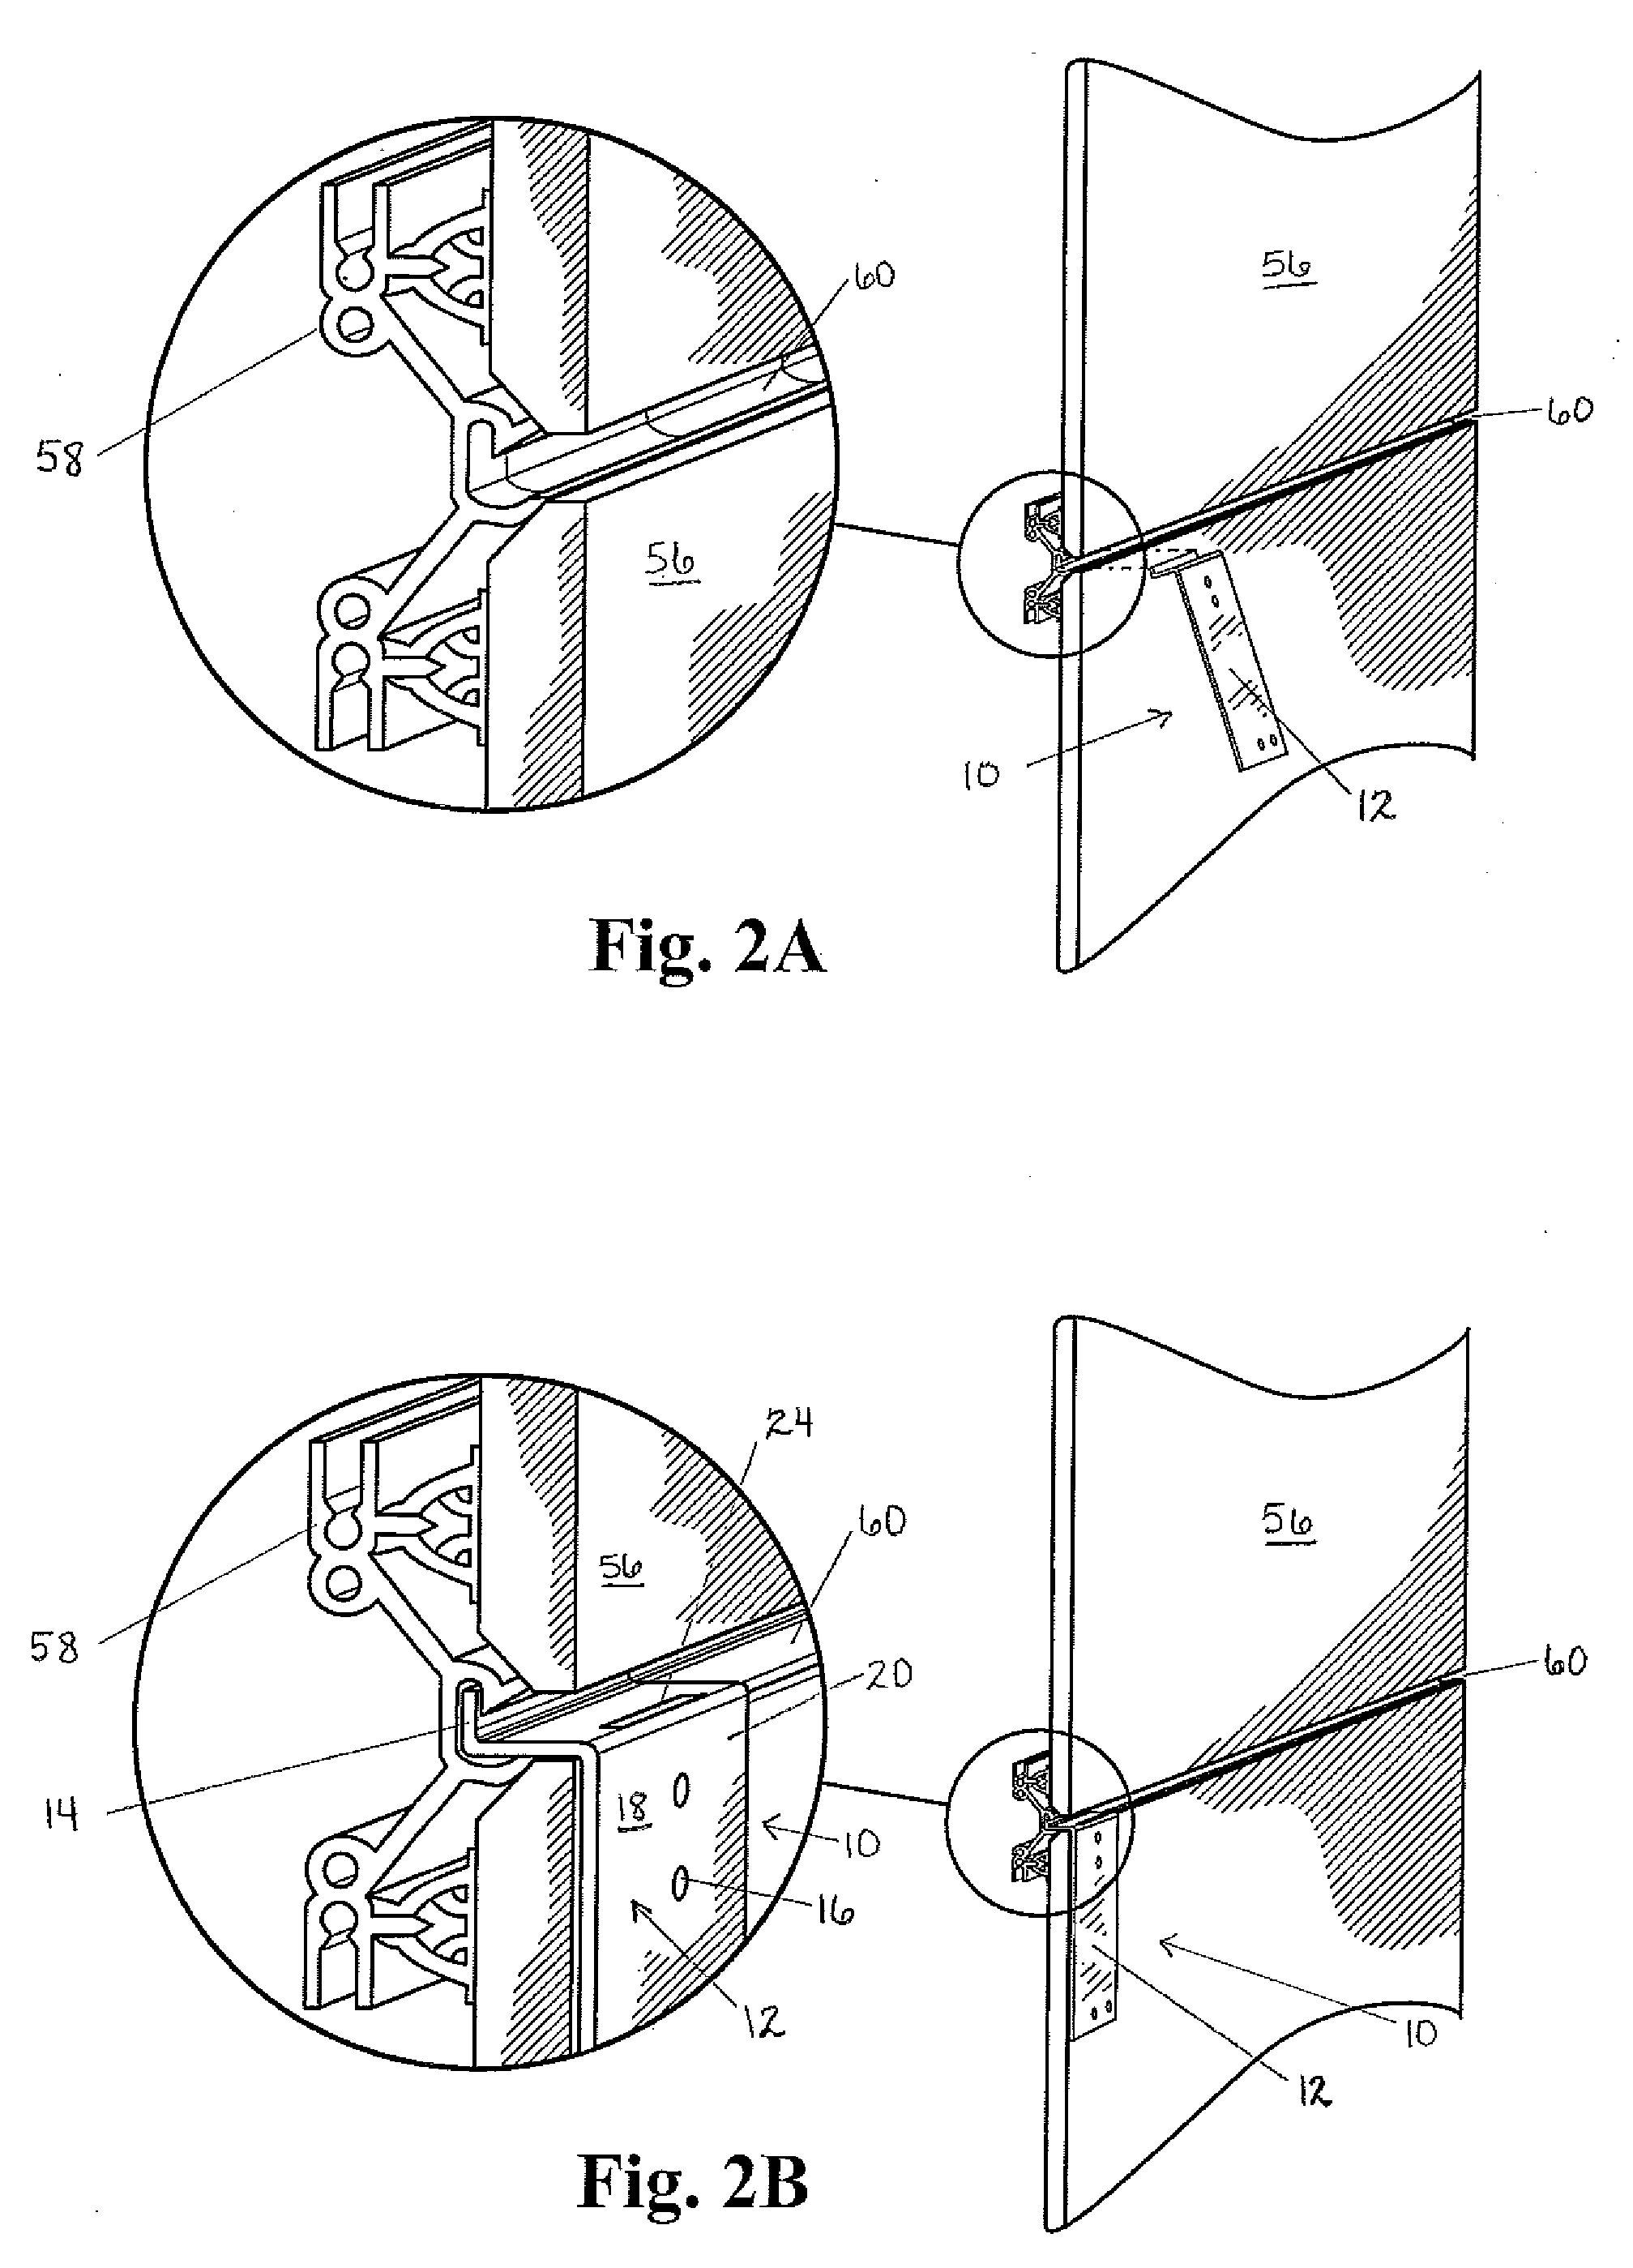 Bracket and method for supporting a cubicle wall on a movable wall having horizontal mounting channels